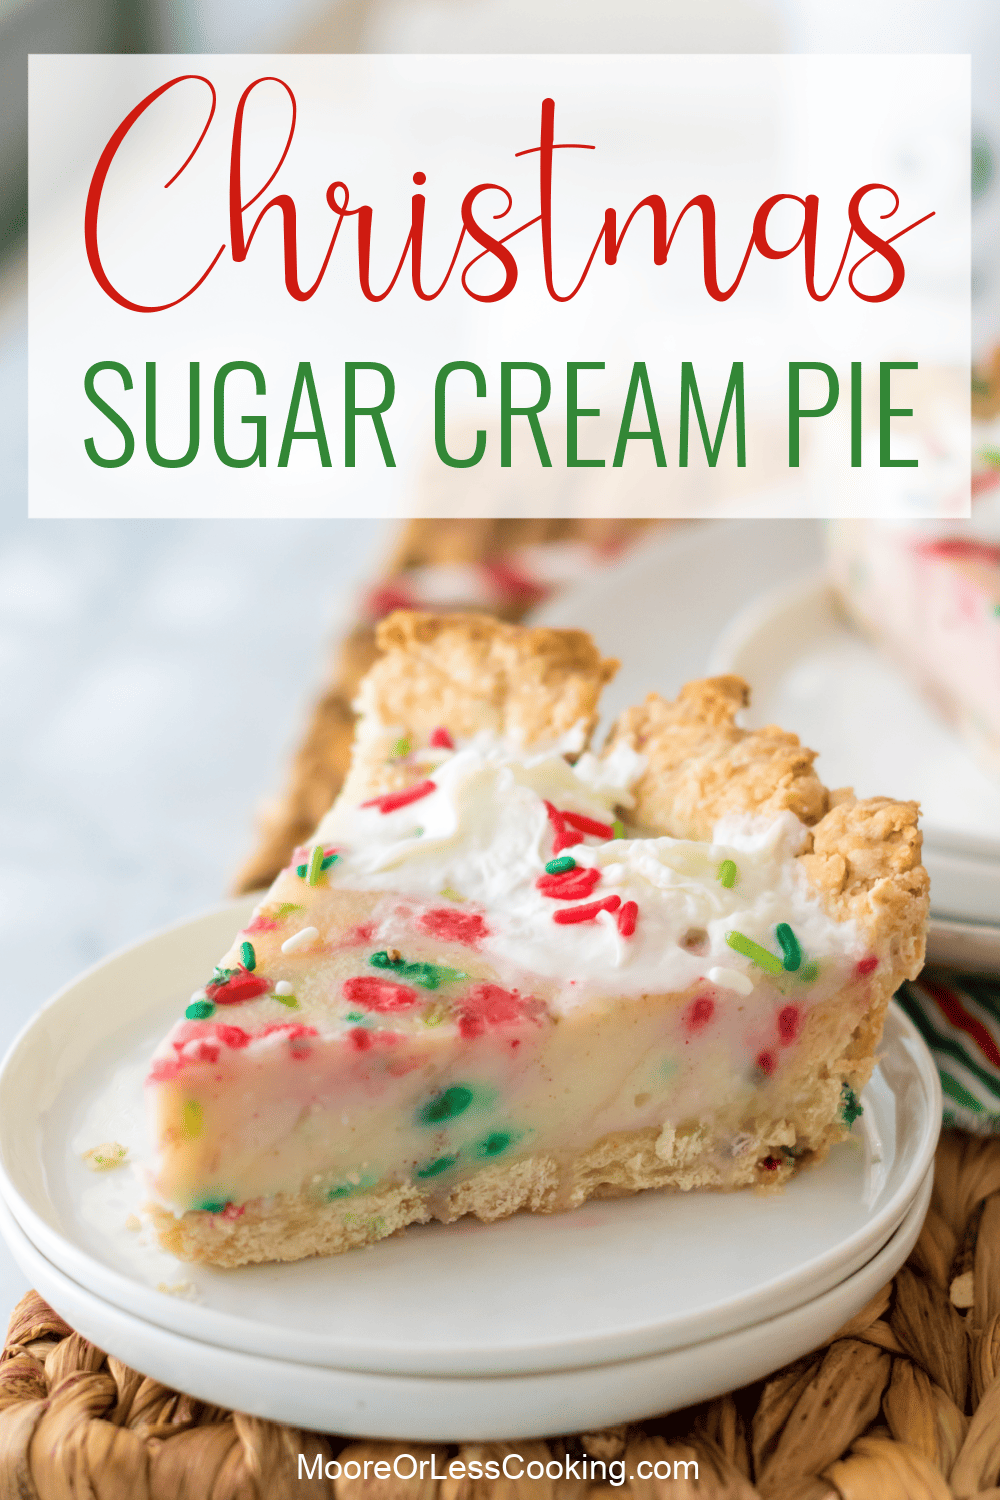 A sweet, creamy vanilla custard filling that's dotted with festive sprinkles makes this Christmas Sugar Cream Pie an irresistible holiday dessert. And best of all, you can make it with simple pantry ingredients! via @Mooreorlesscook